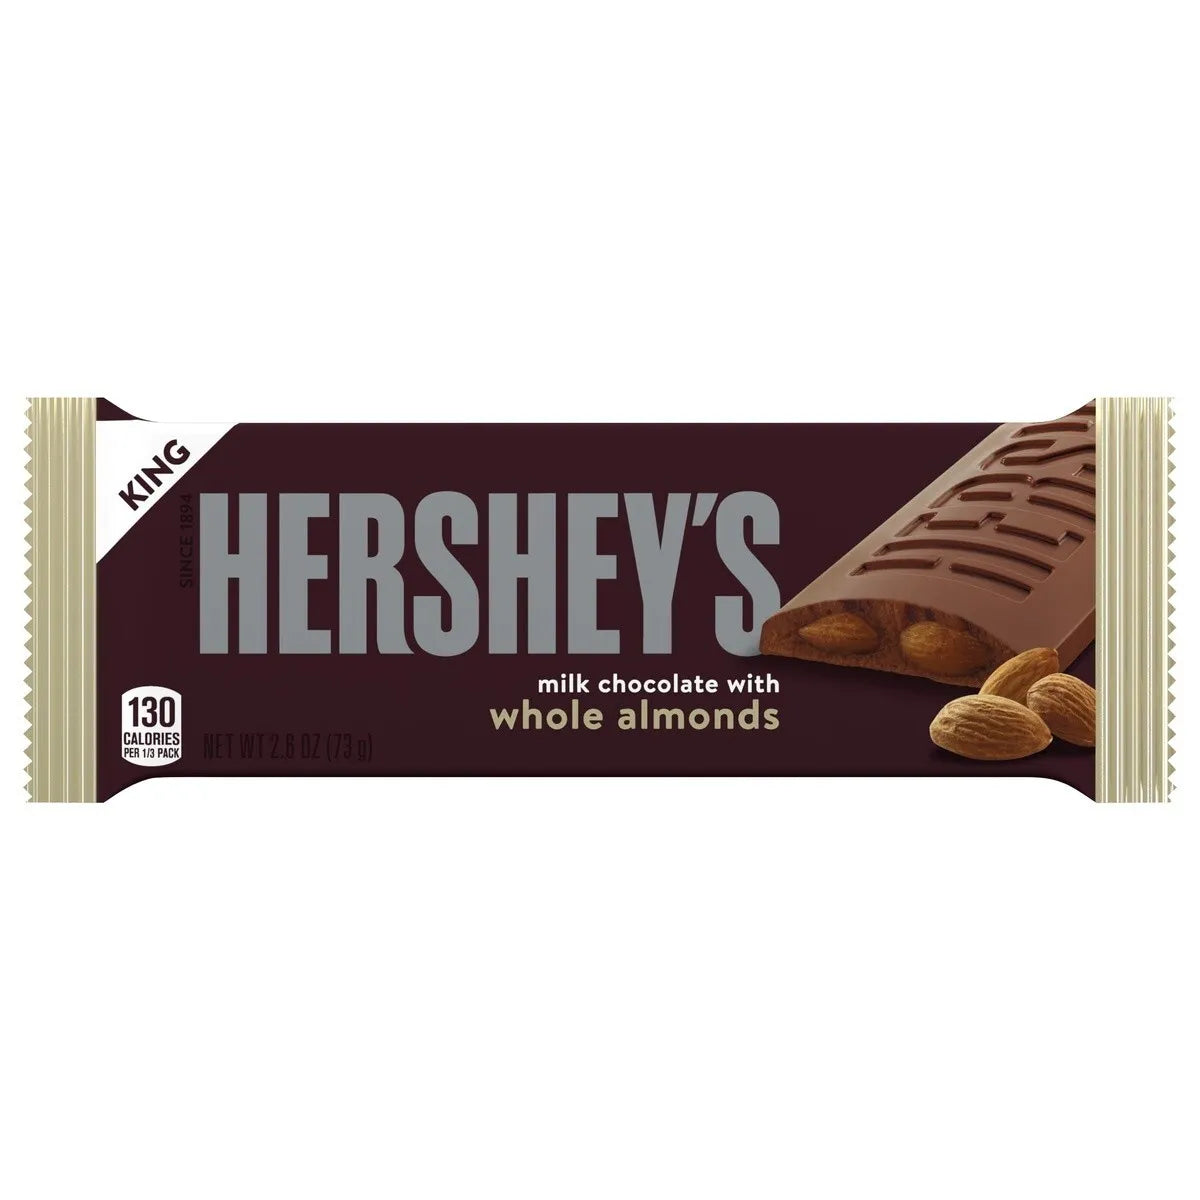 Hershey’s King Size Milk Chocolate with Whole Almonds Limited Edition